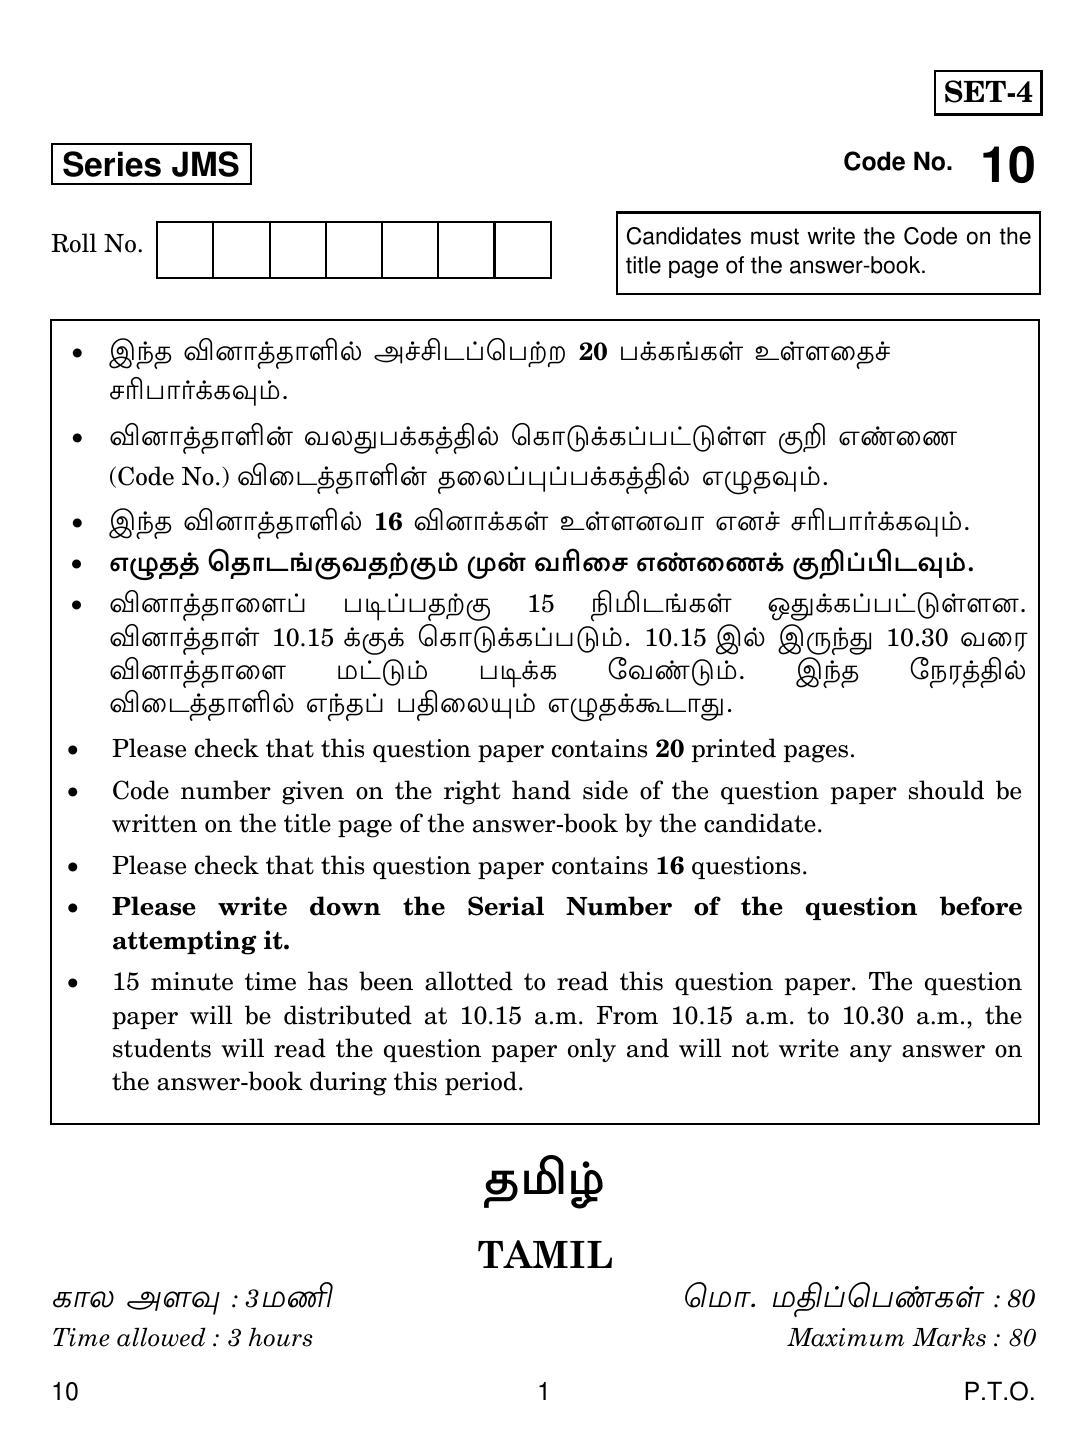 CBSE Class 10 10 Tamil 2019 Question Paper - Page 1